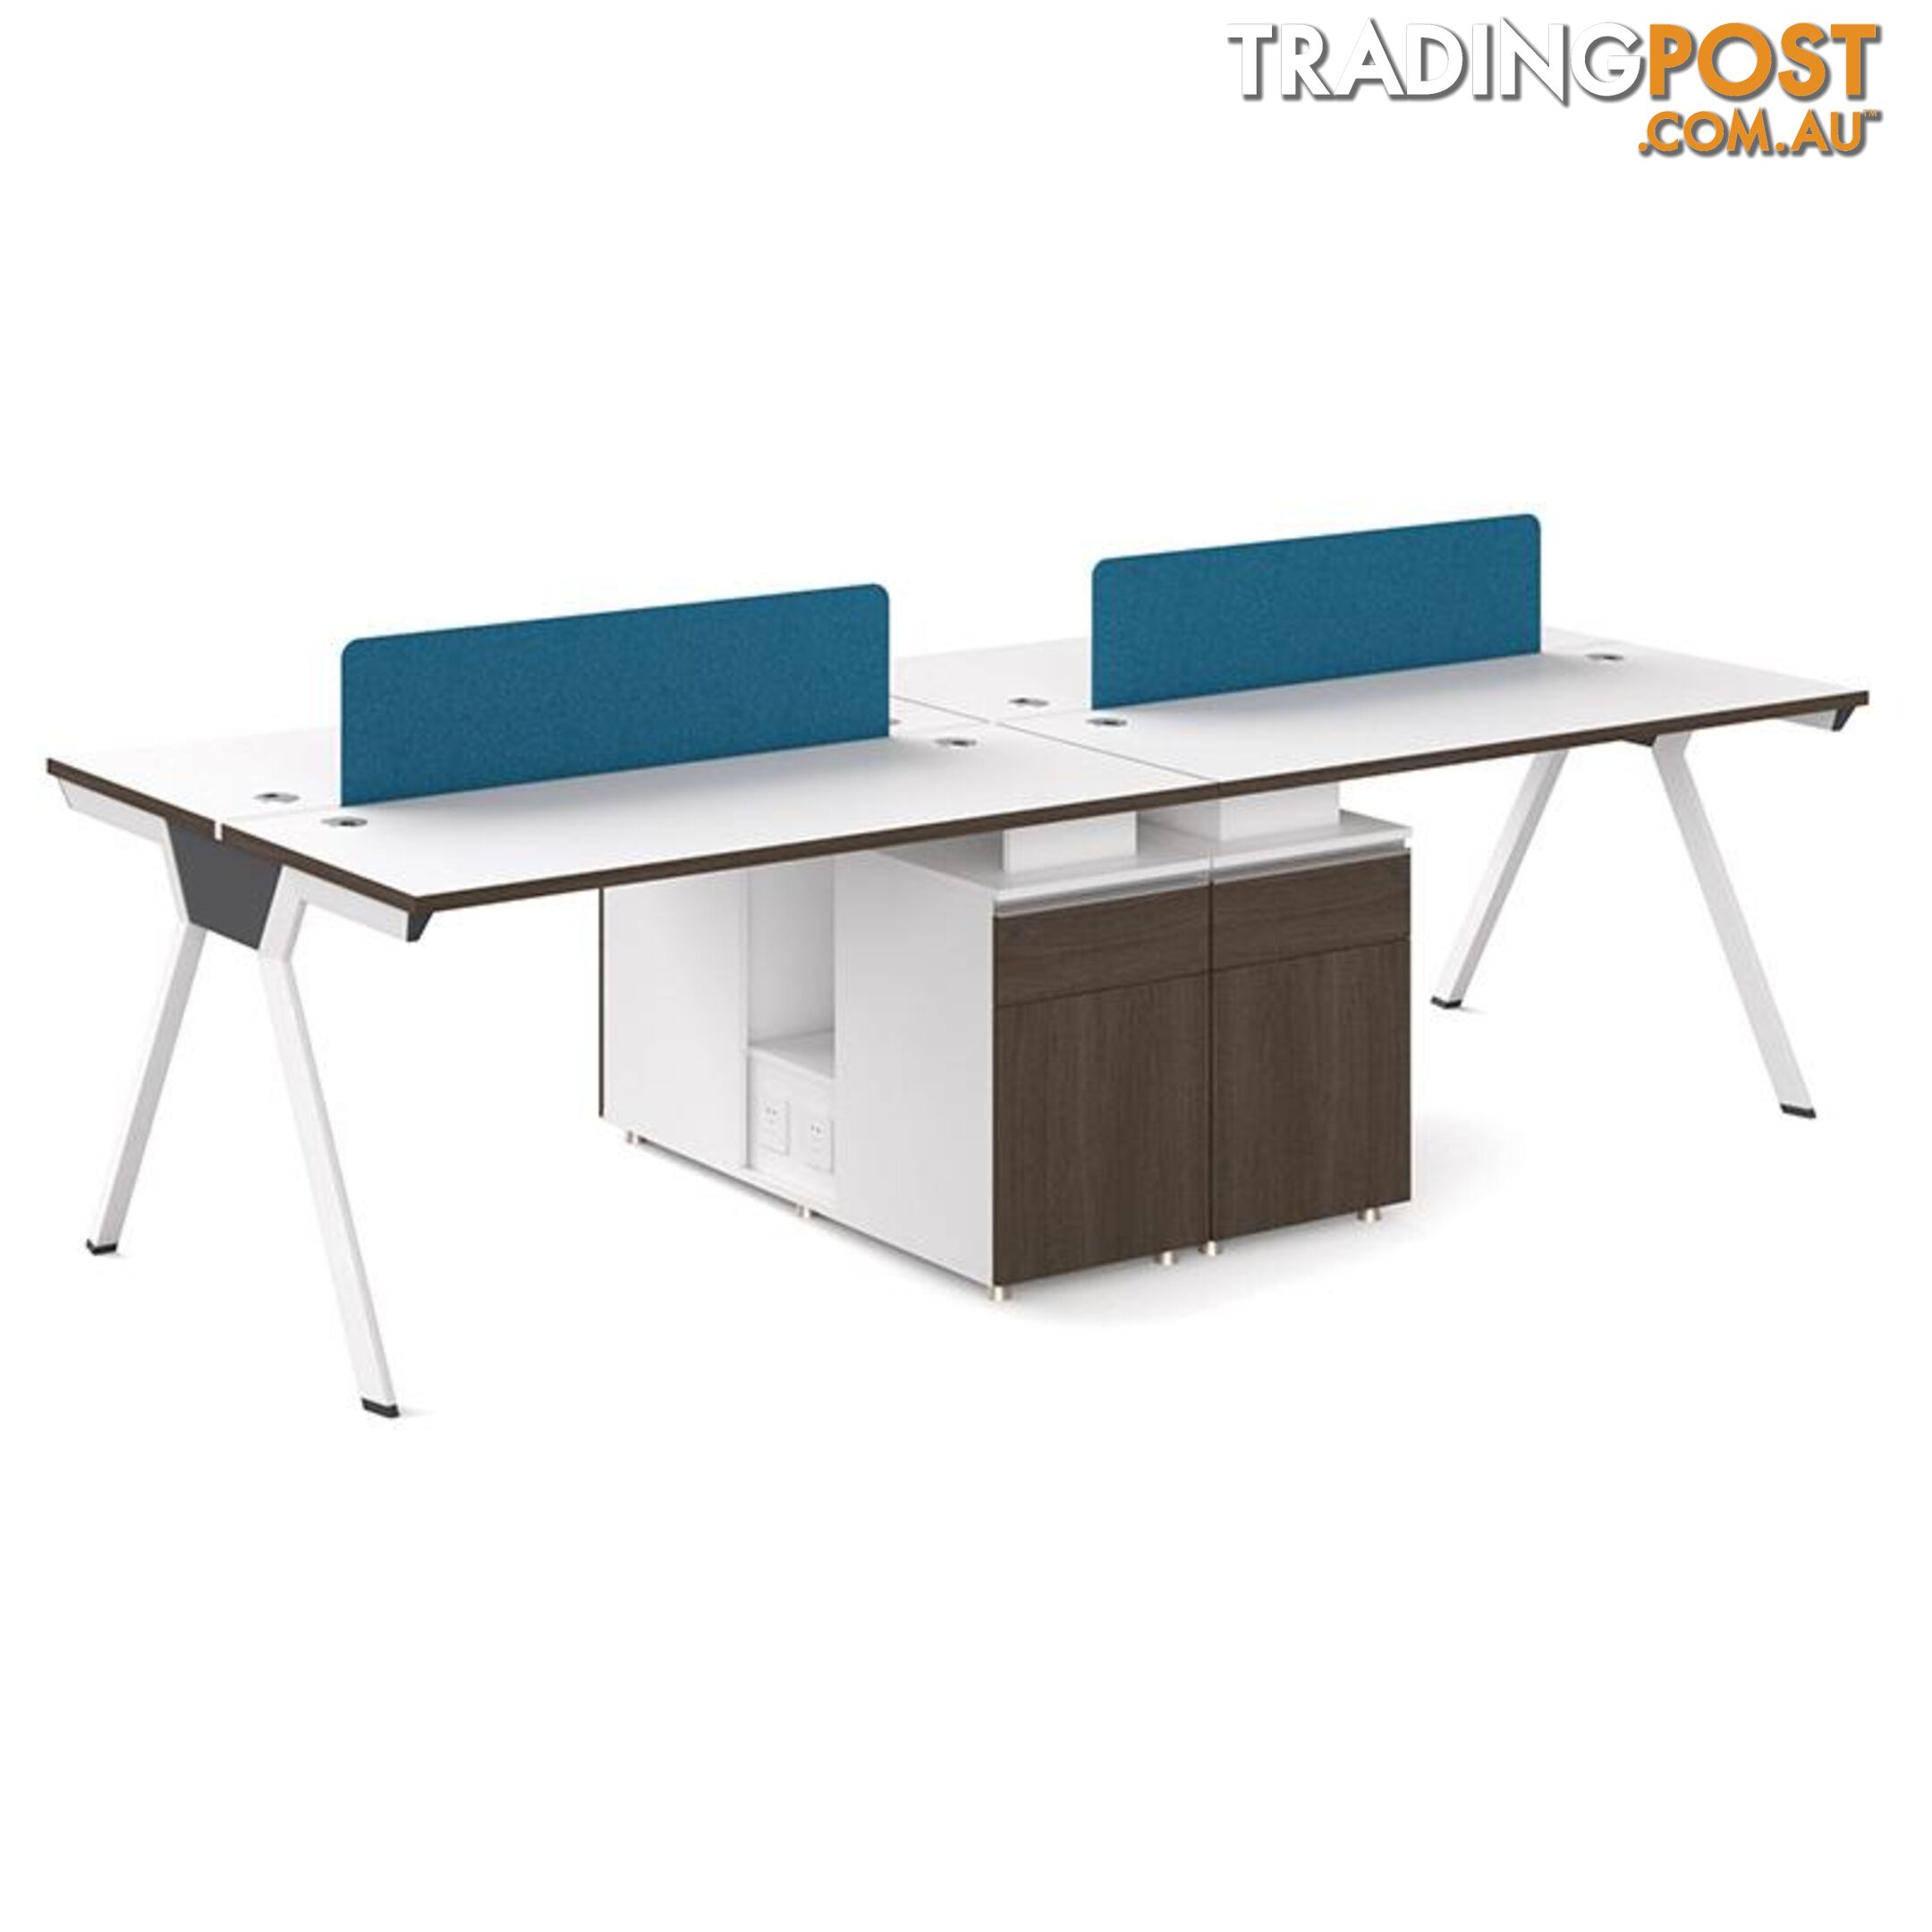 WILLS 4 People Back to Back Workstation - Coffee & White - MF-22FKD461 - 9334719010298